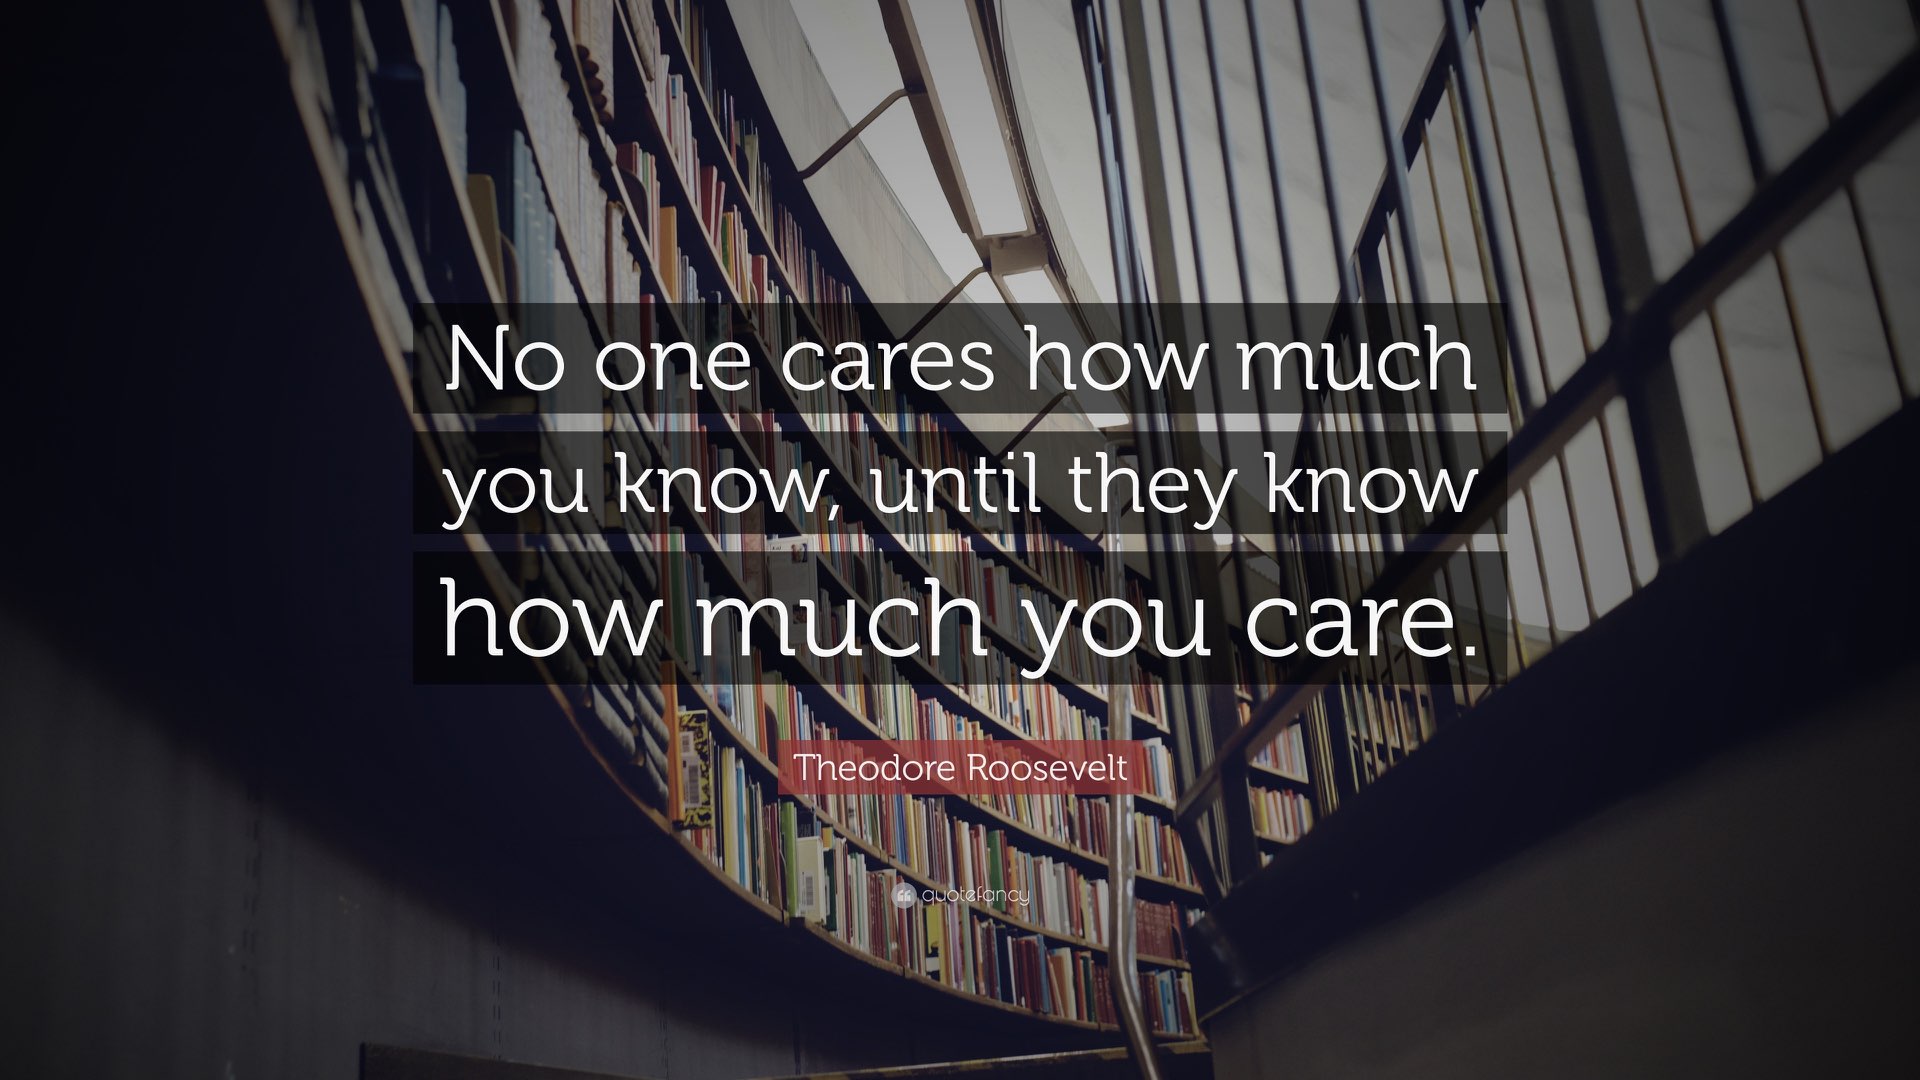 A quote by Theodore Roosevelt “No one cares how much you know, until they know how much you care“